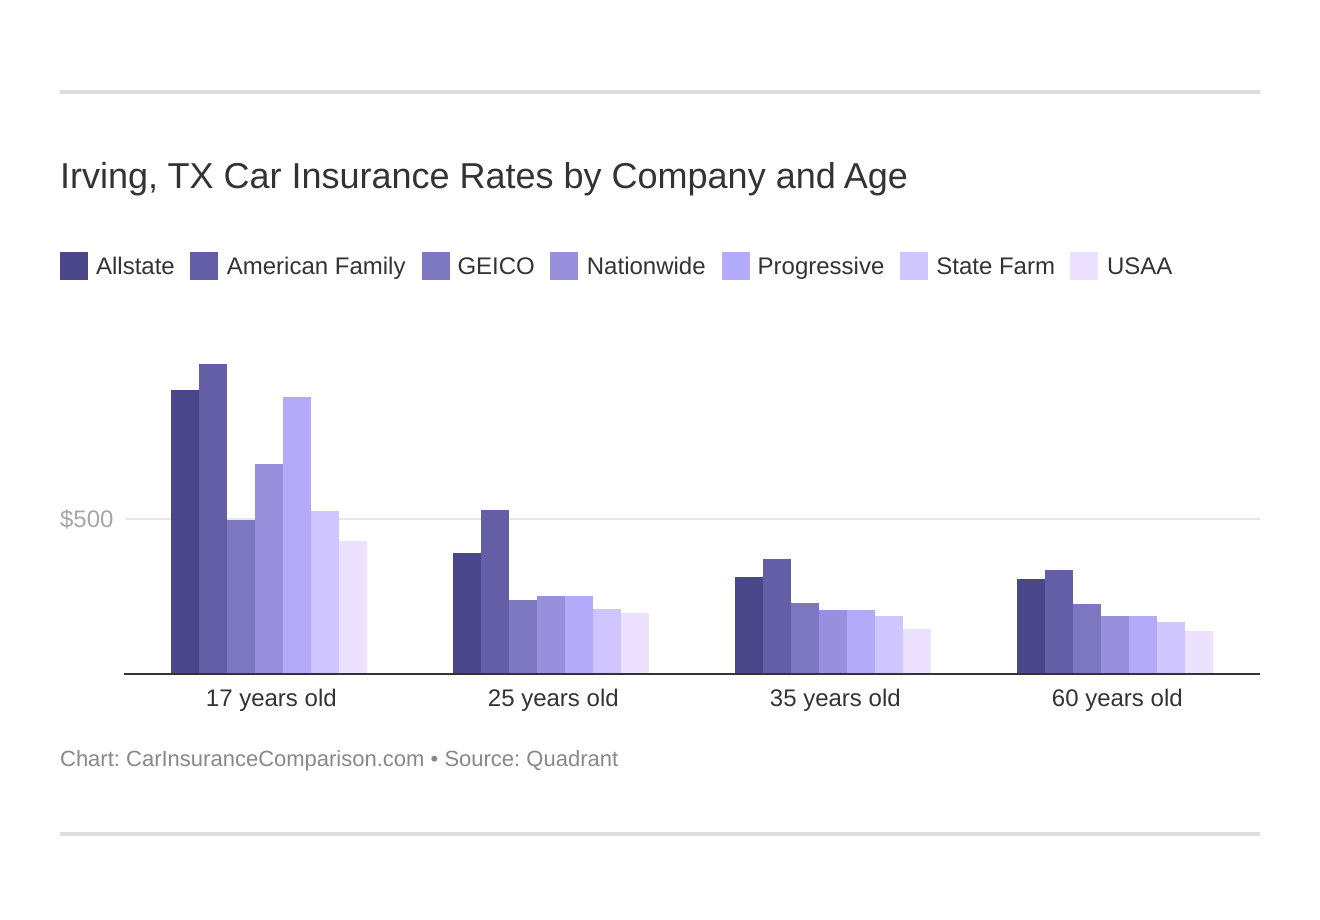 Irving, TX Car Insurance Rates by Company and Age